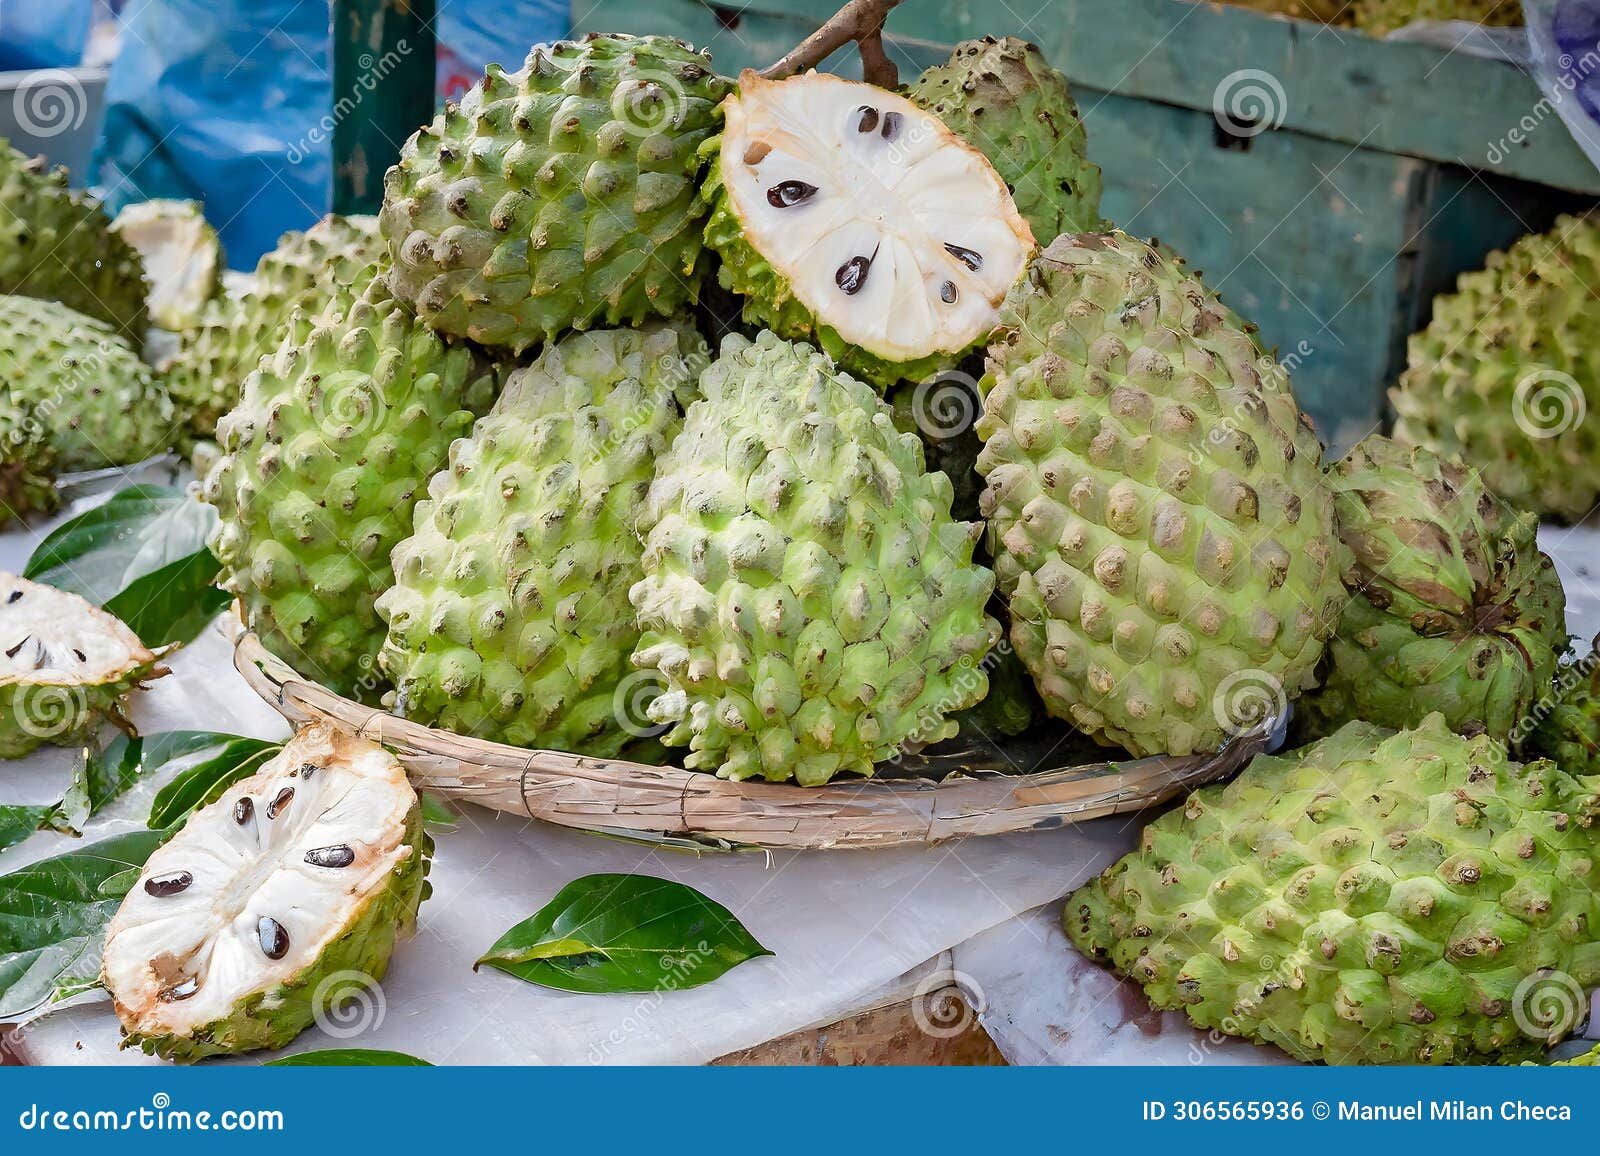 a vibrant display of fresh soursops, one cut open revealing the juicy interior, at an outdoor market